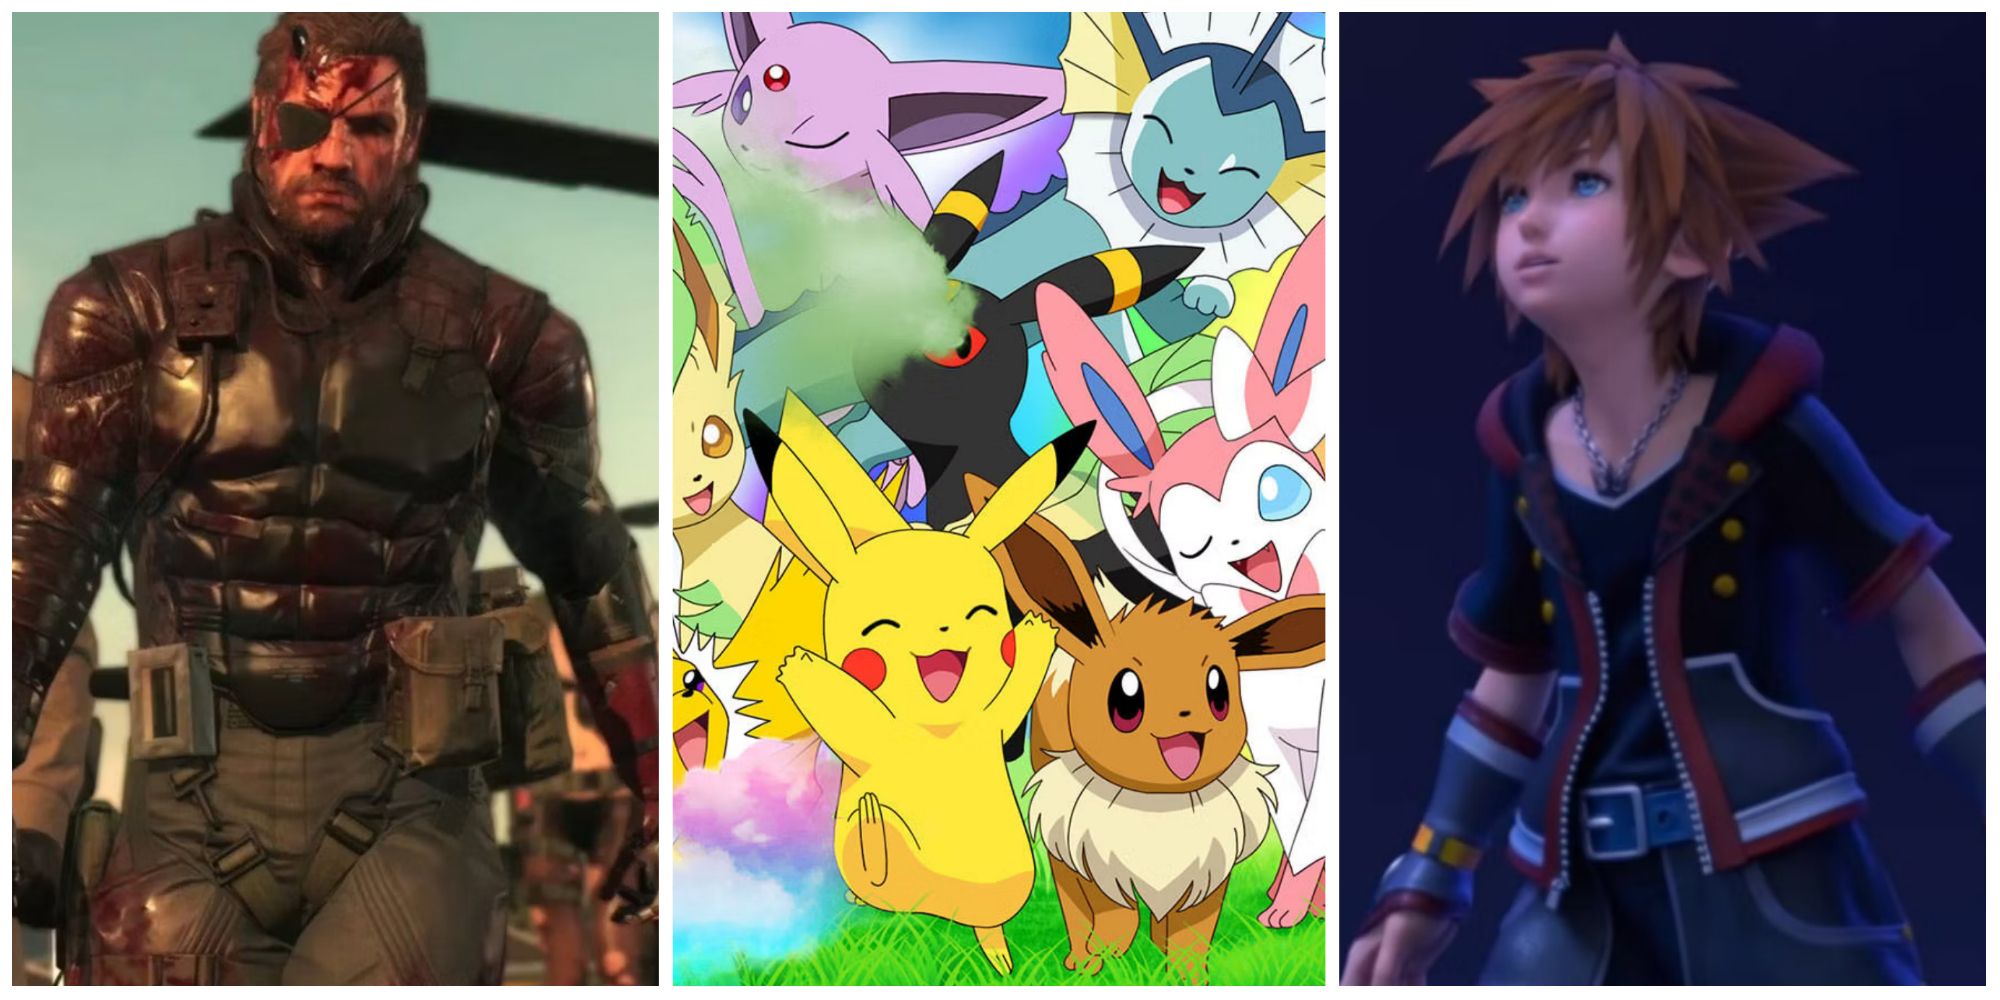 a collage of images from metal gear solid, pokemon, and kingdom hearts